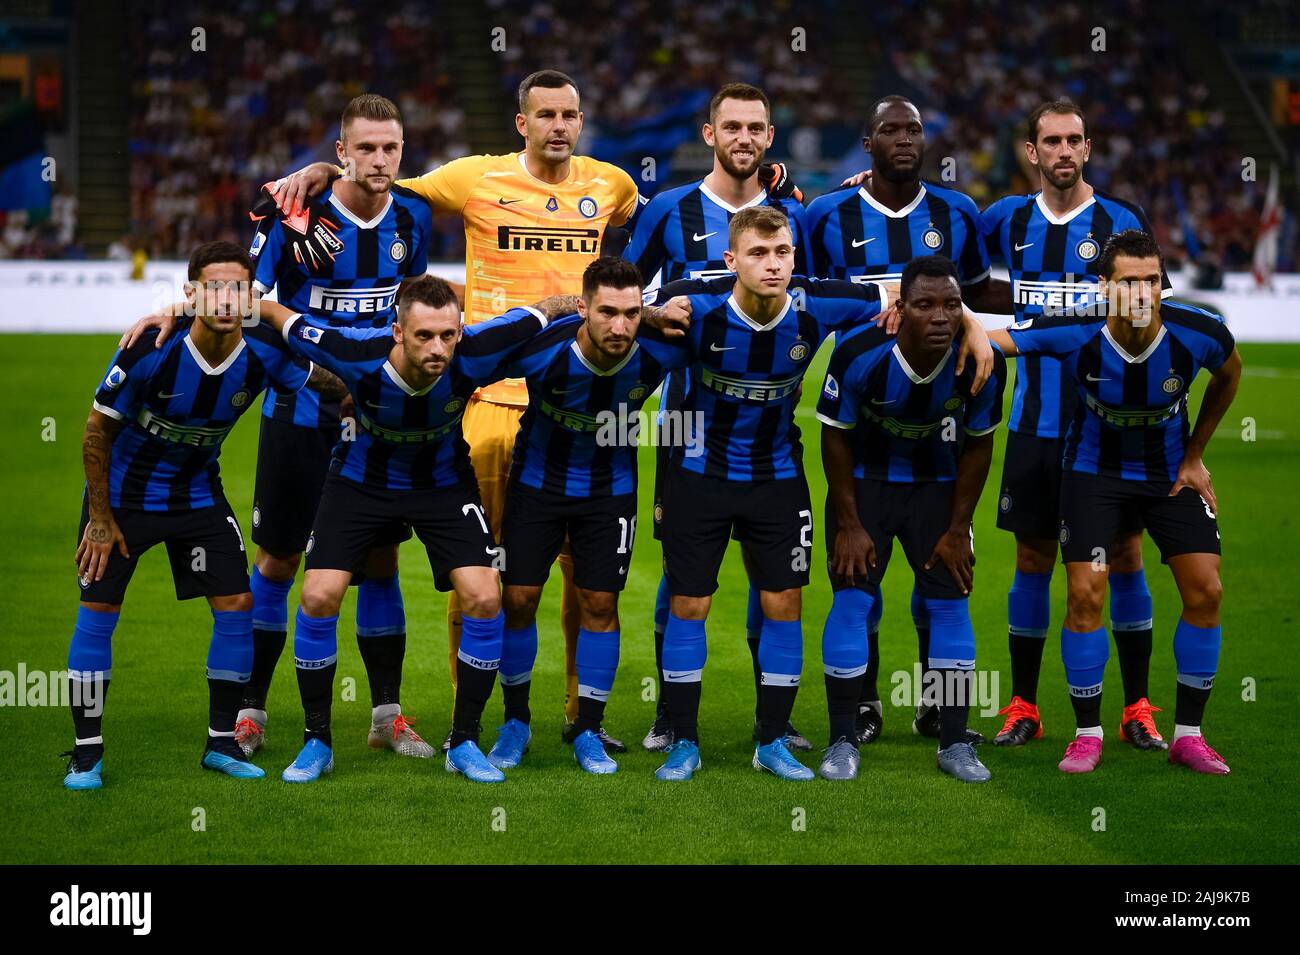 Milan, Italy. 14 September, 2019: Players of FC Internazionale pose for a team photo prior to the Serie A football match between FC Internazionale and Udinese Calcio. FC Internazionale won 1-0 over Udinese Calcio. Credit: Nicolò Campo/Alamy Live News Stock Photo